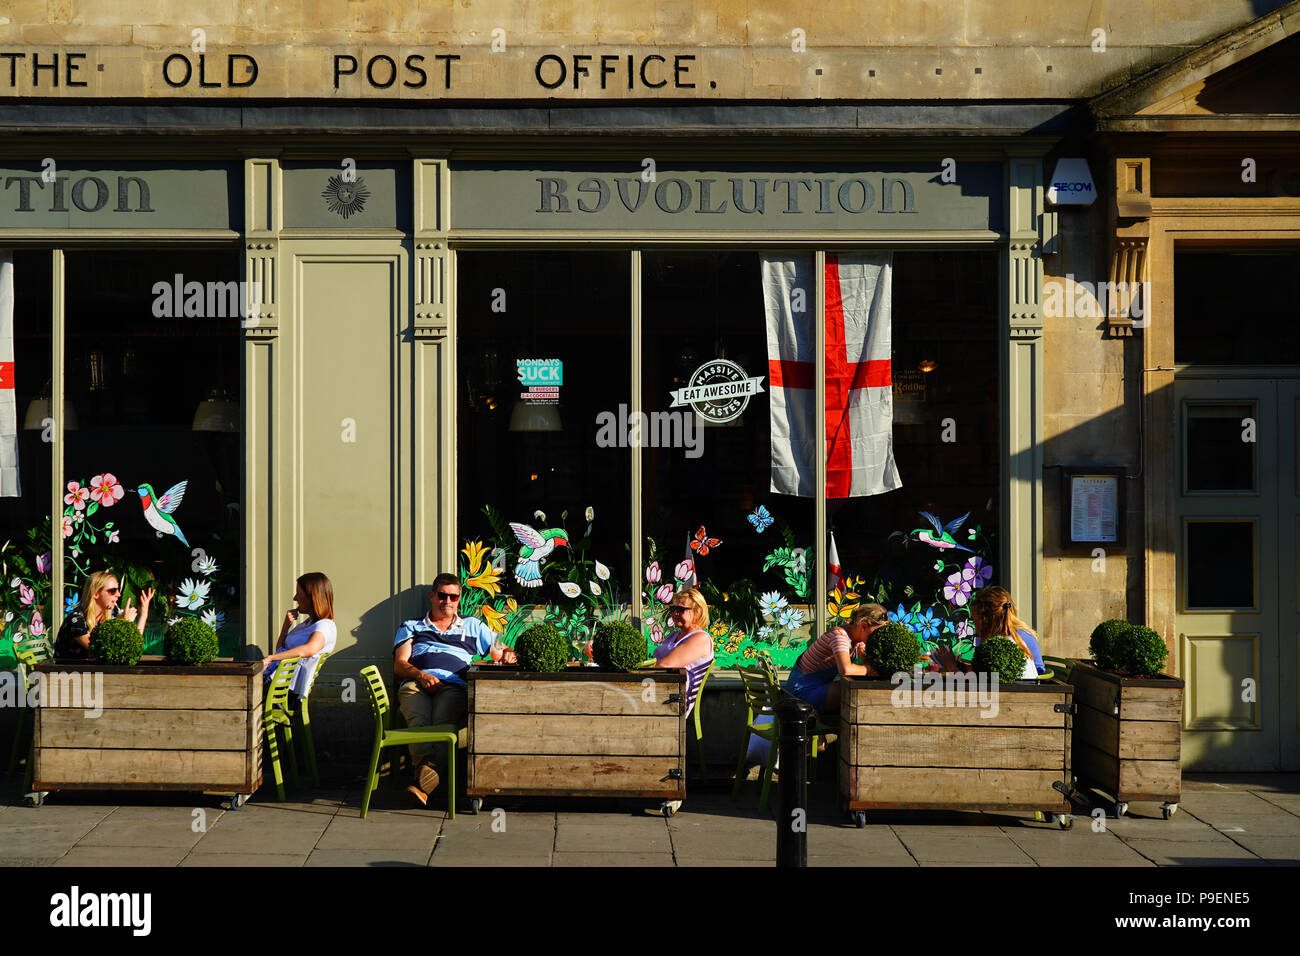 People drinking on the terrace of a bar in Bath, UK. Photo date: Thursday, July 5, 2018. Photo: Roger Garfield/Alamy Stock Photo